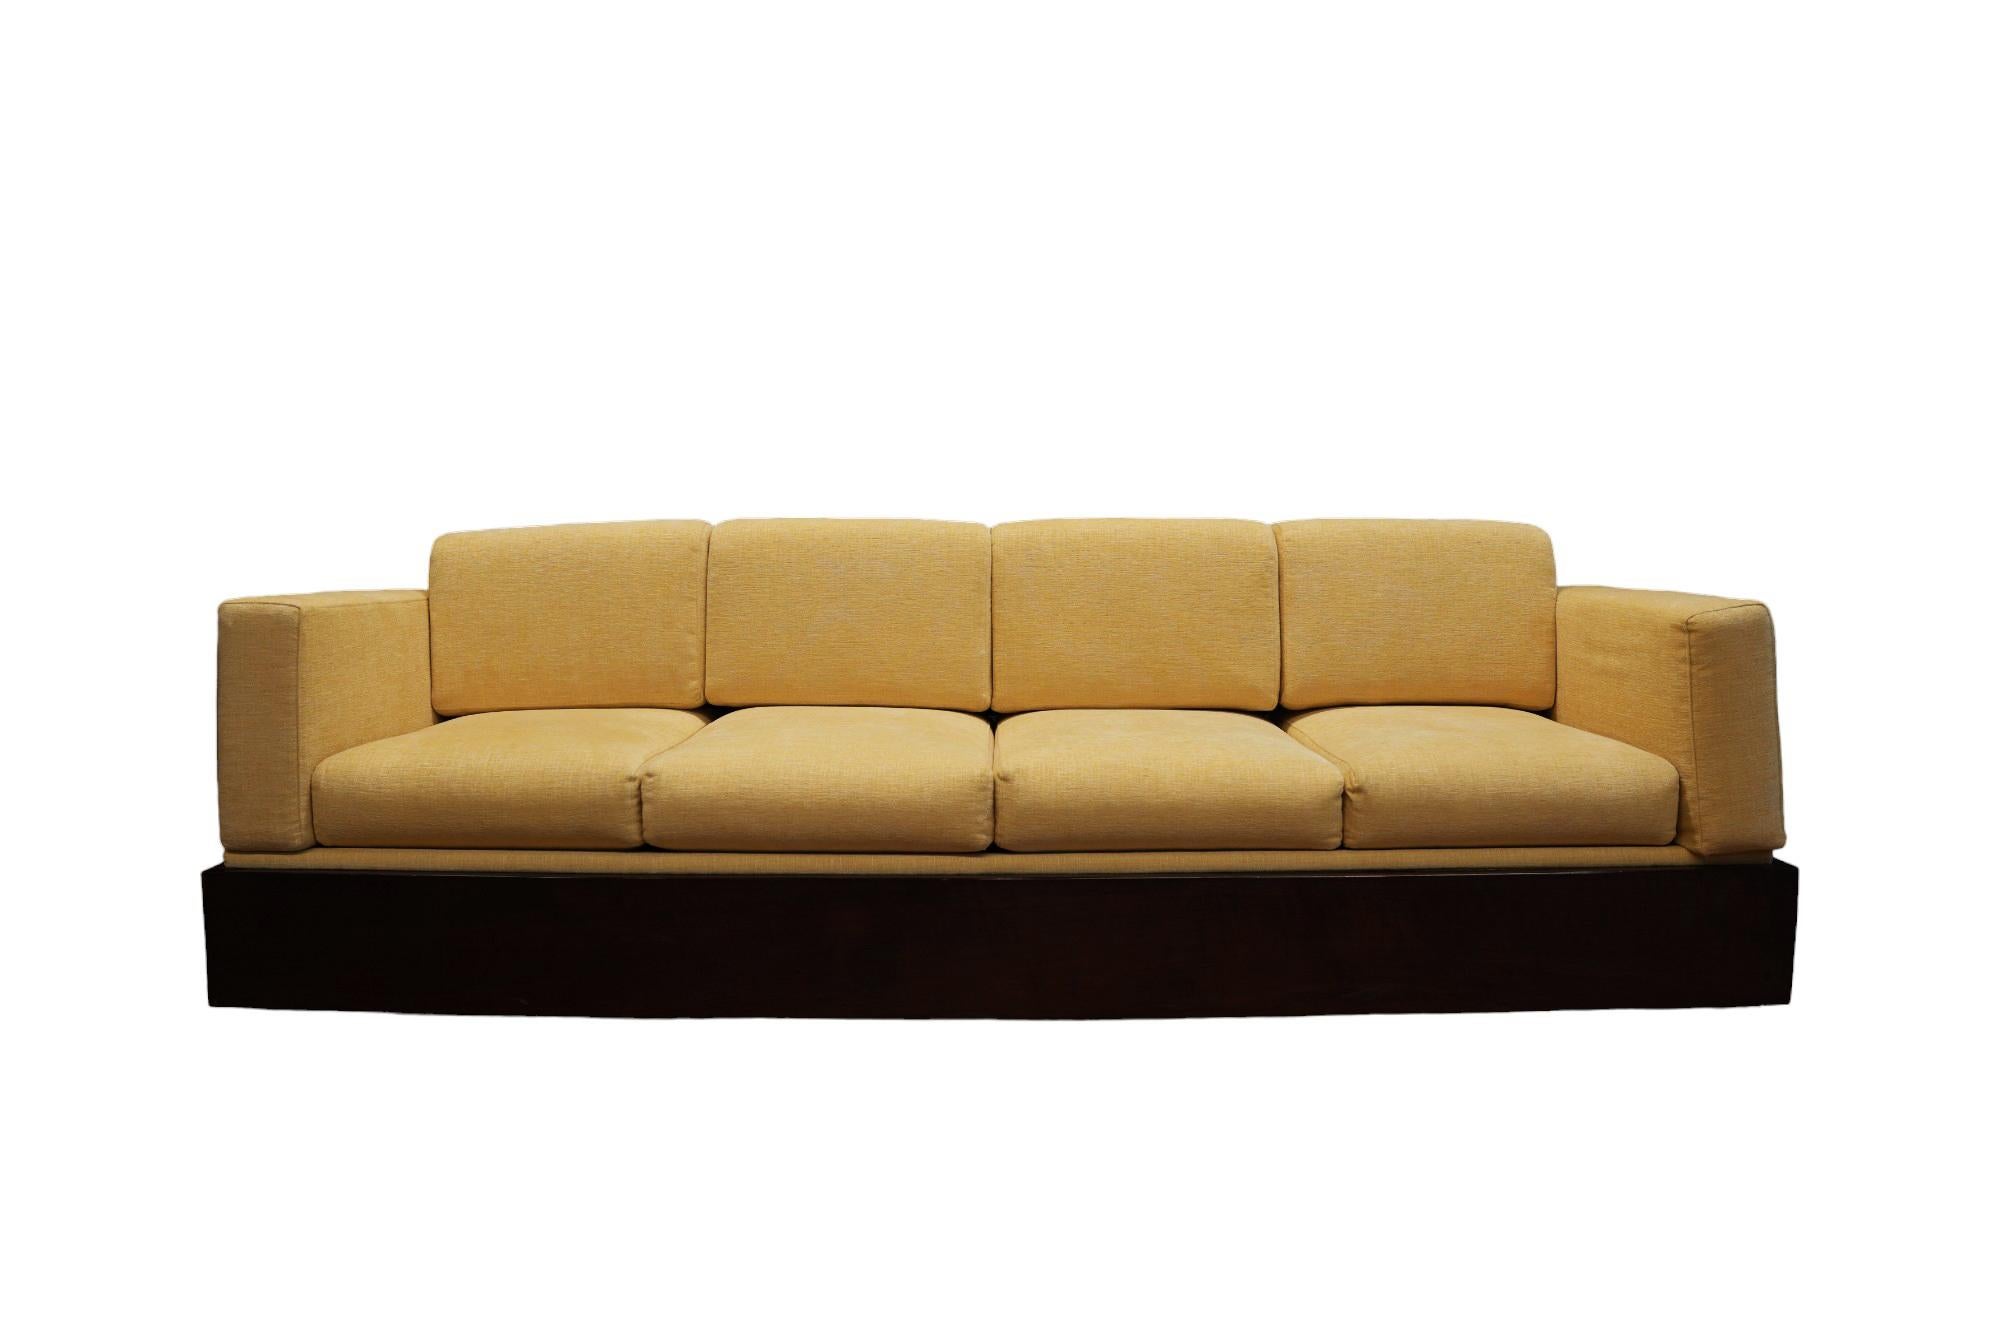 This Brazilian Modern Sofa in Hardwood and White Linen by Celina made in the 60s is nothing less than spectacular!

The frame of the sofa is made with Brazilian Rosewood  and the cushions have been reupholstered with Yellow Chenille. The shape of